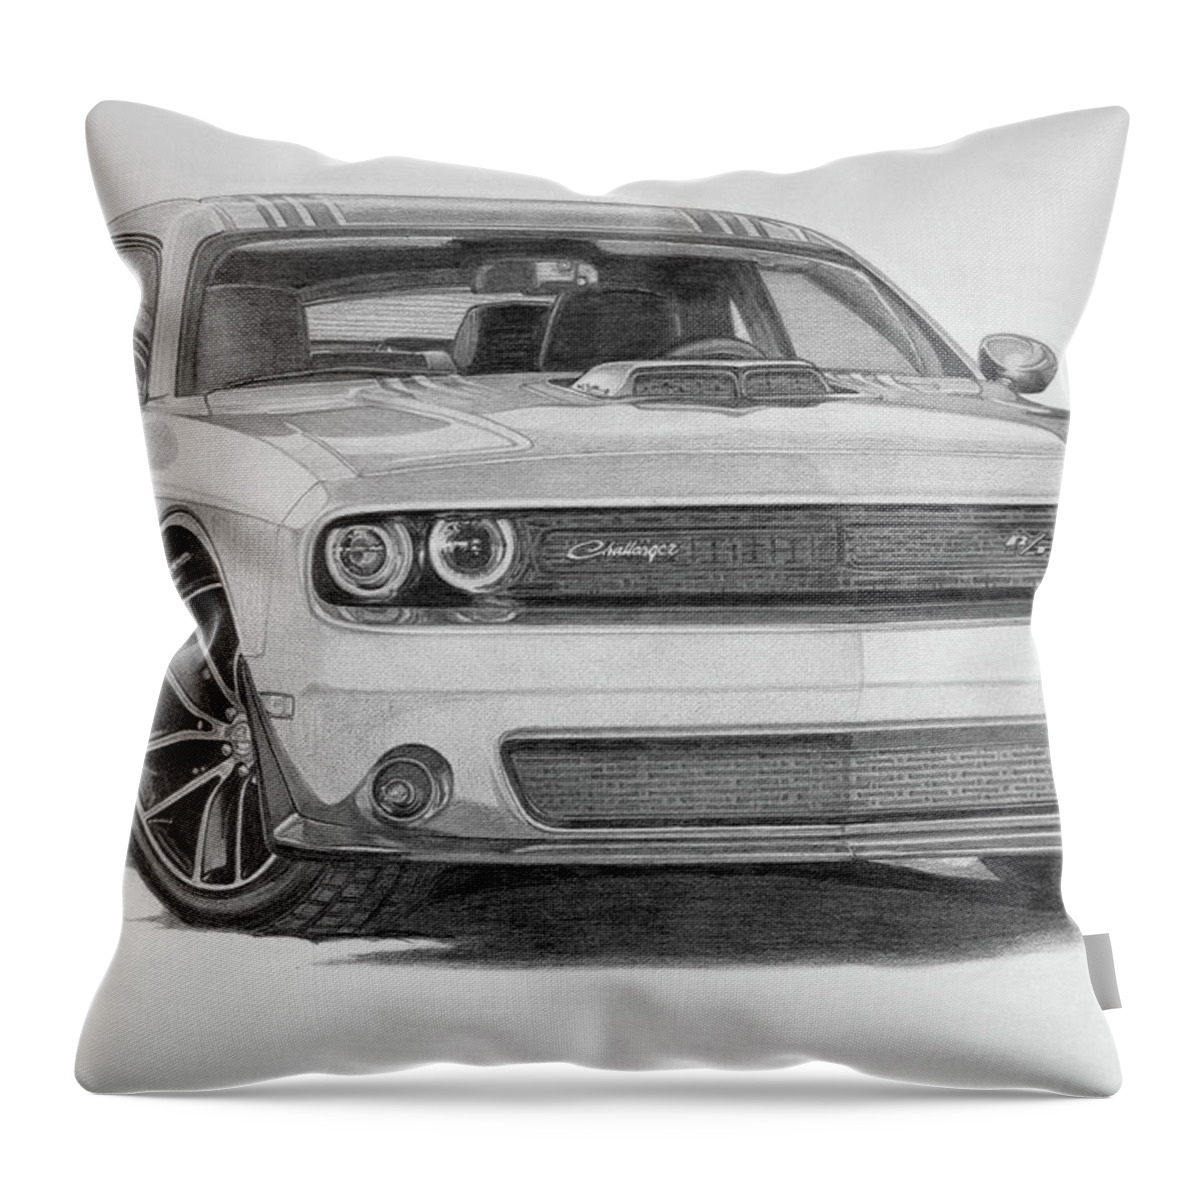  Throw Pillow featuring the drawing Challenger No Sig by Dan Menta